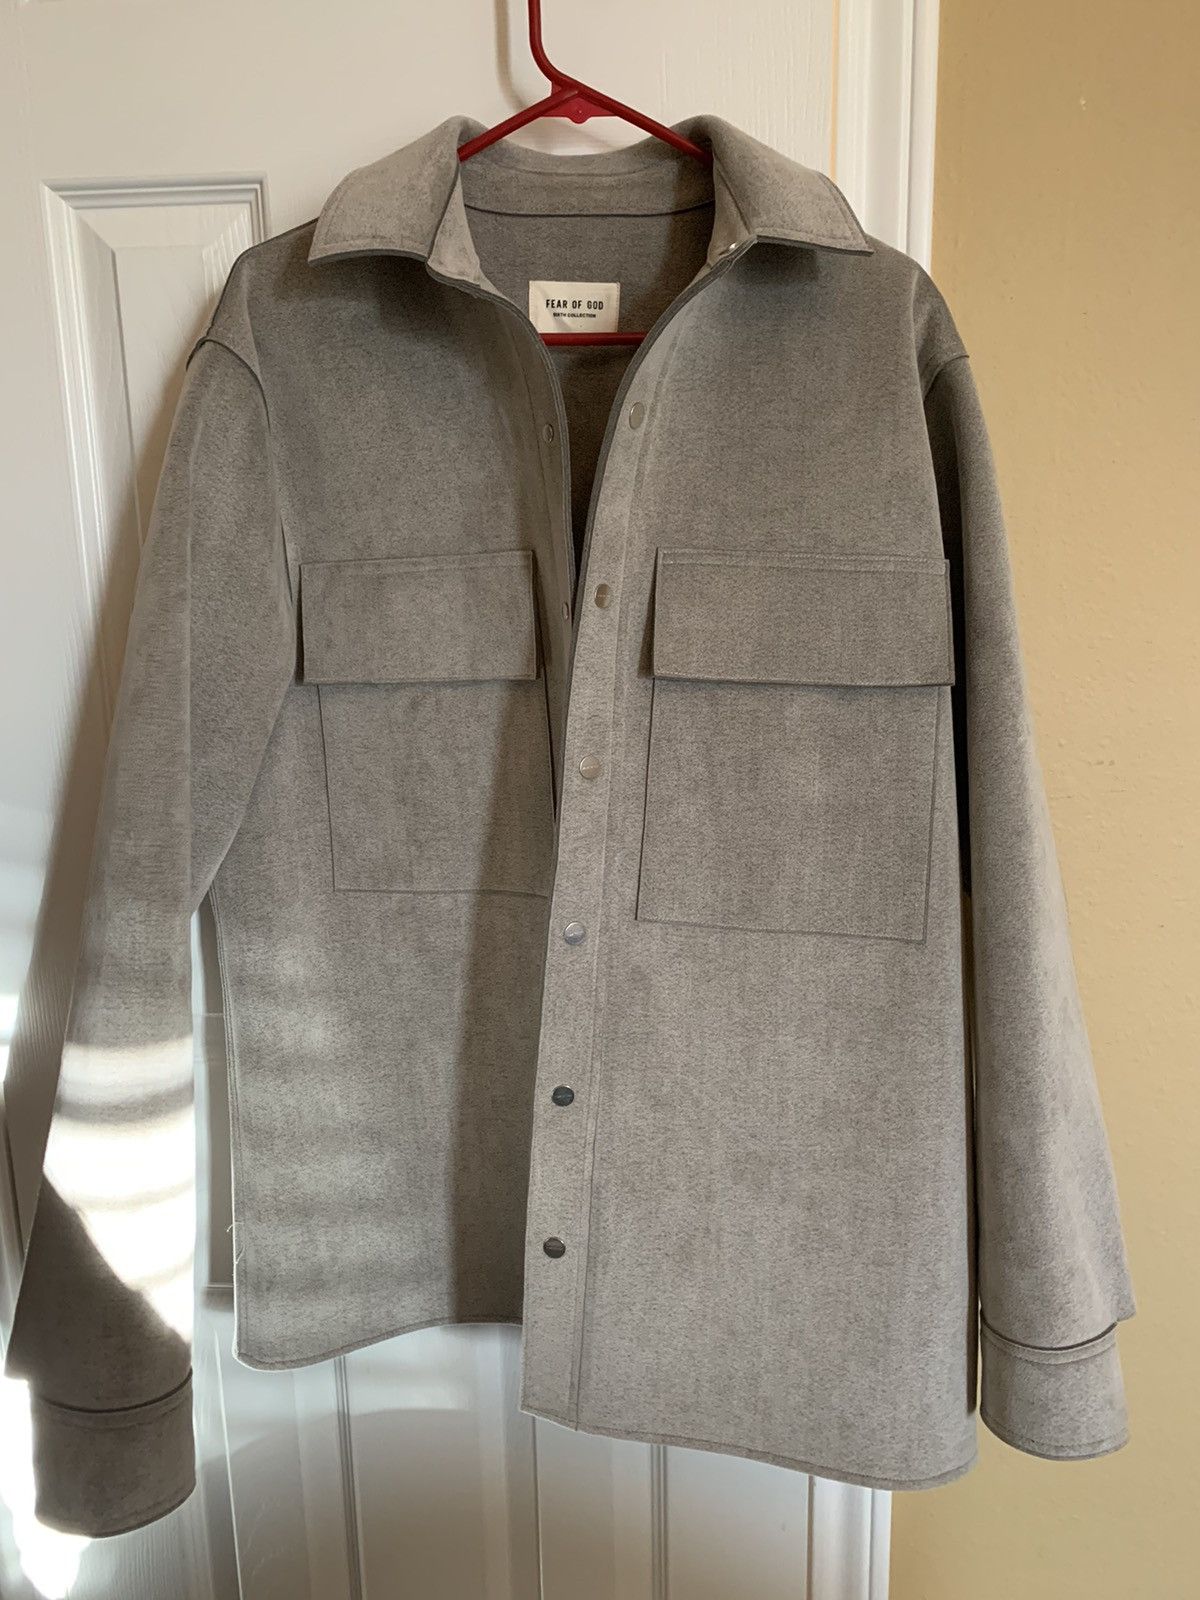 Fear of God 6th Collection Ultrasuede Shirt Jacket | Grailed